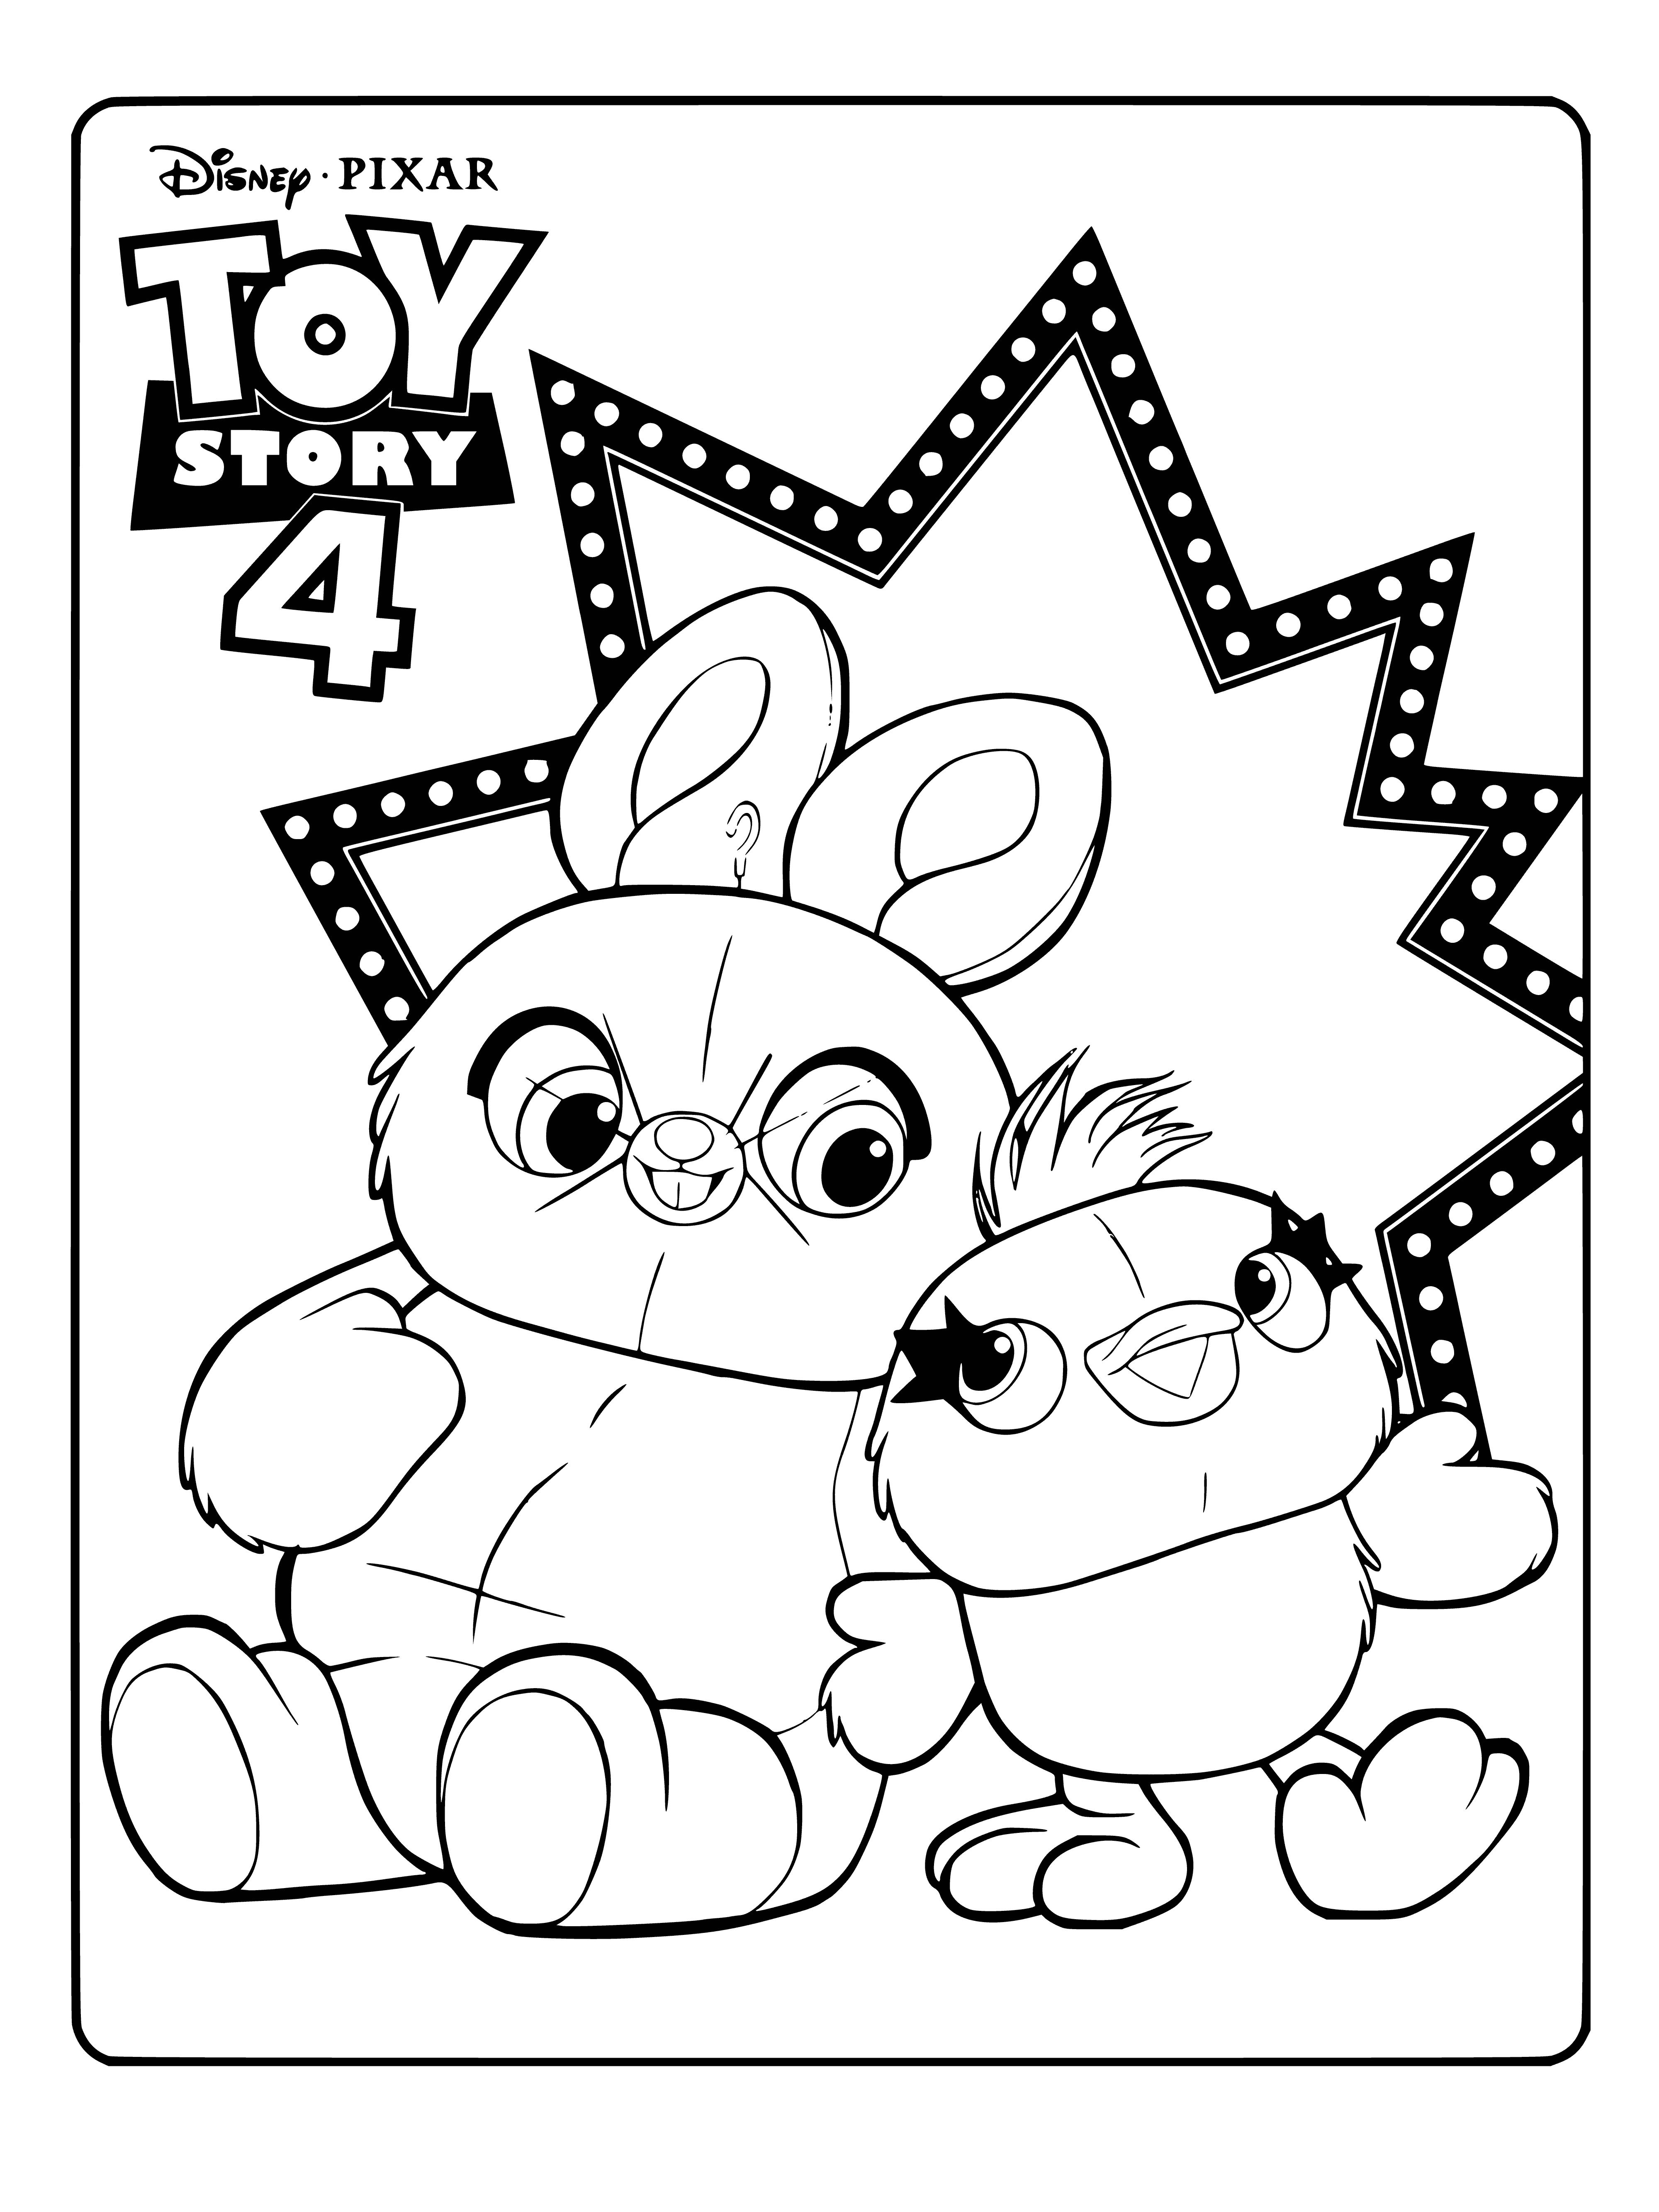 coloring page: Two girls play with toy train & cars, happy & having fun.